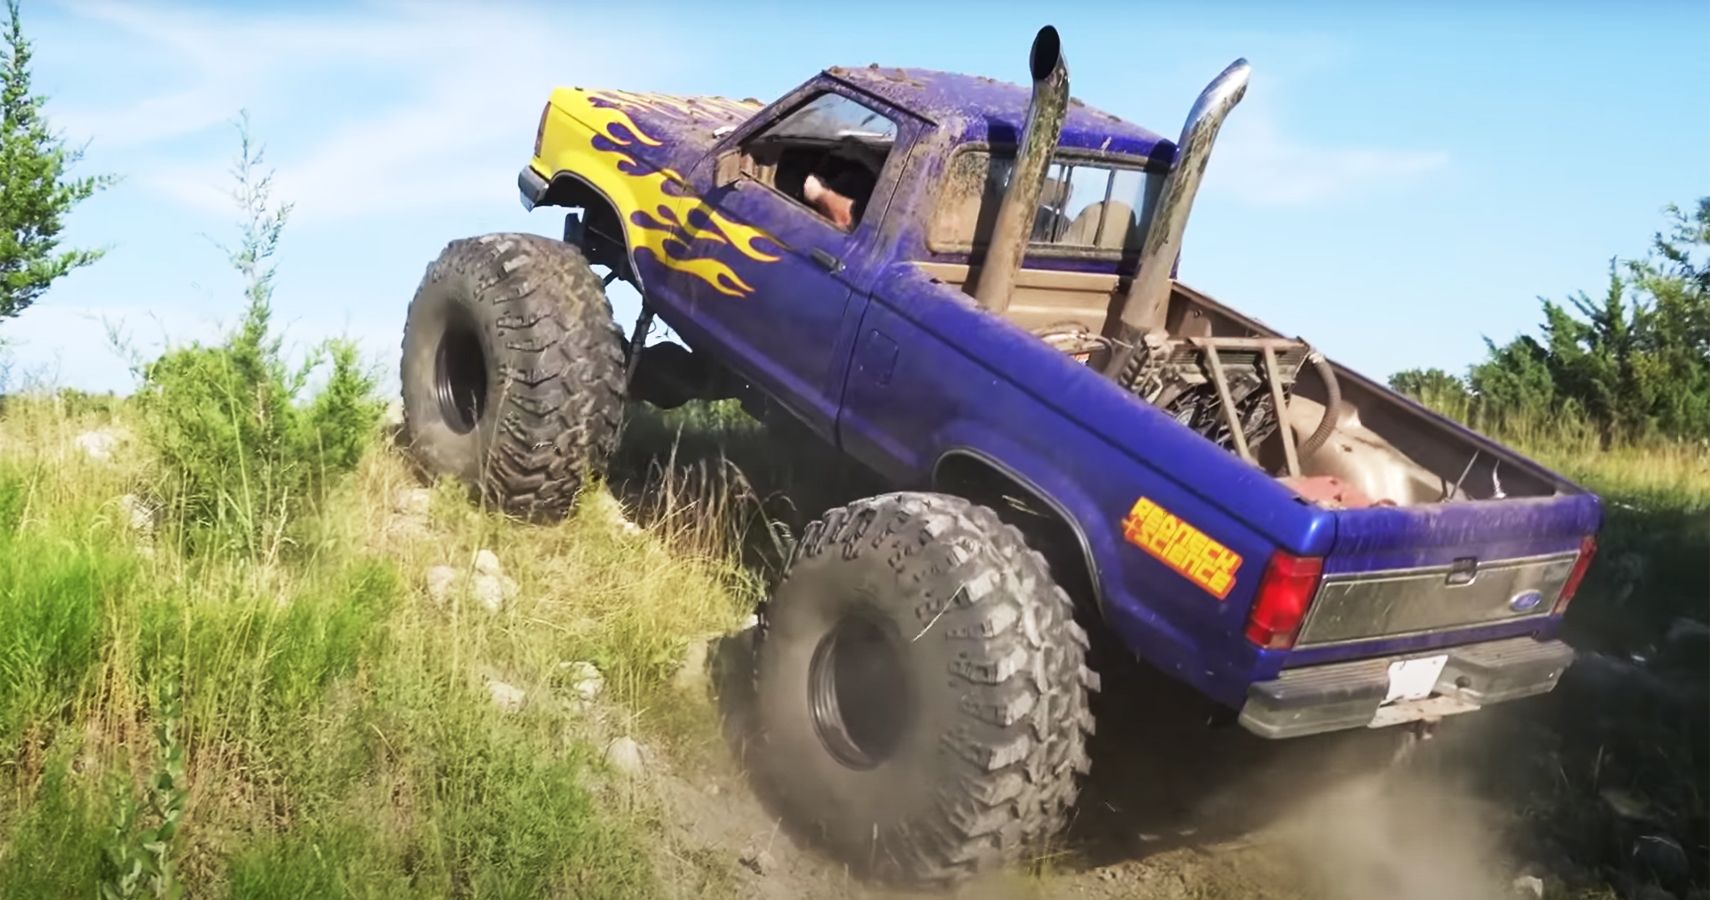 This Ford Ranger Monster Truck Puts Other Off Road Vehicles To Shame